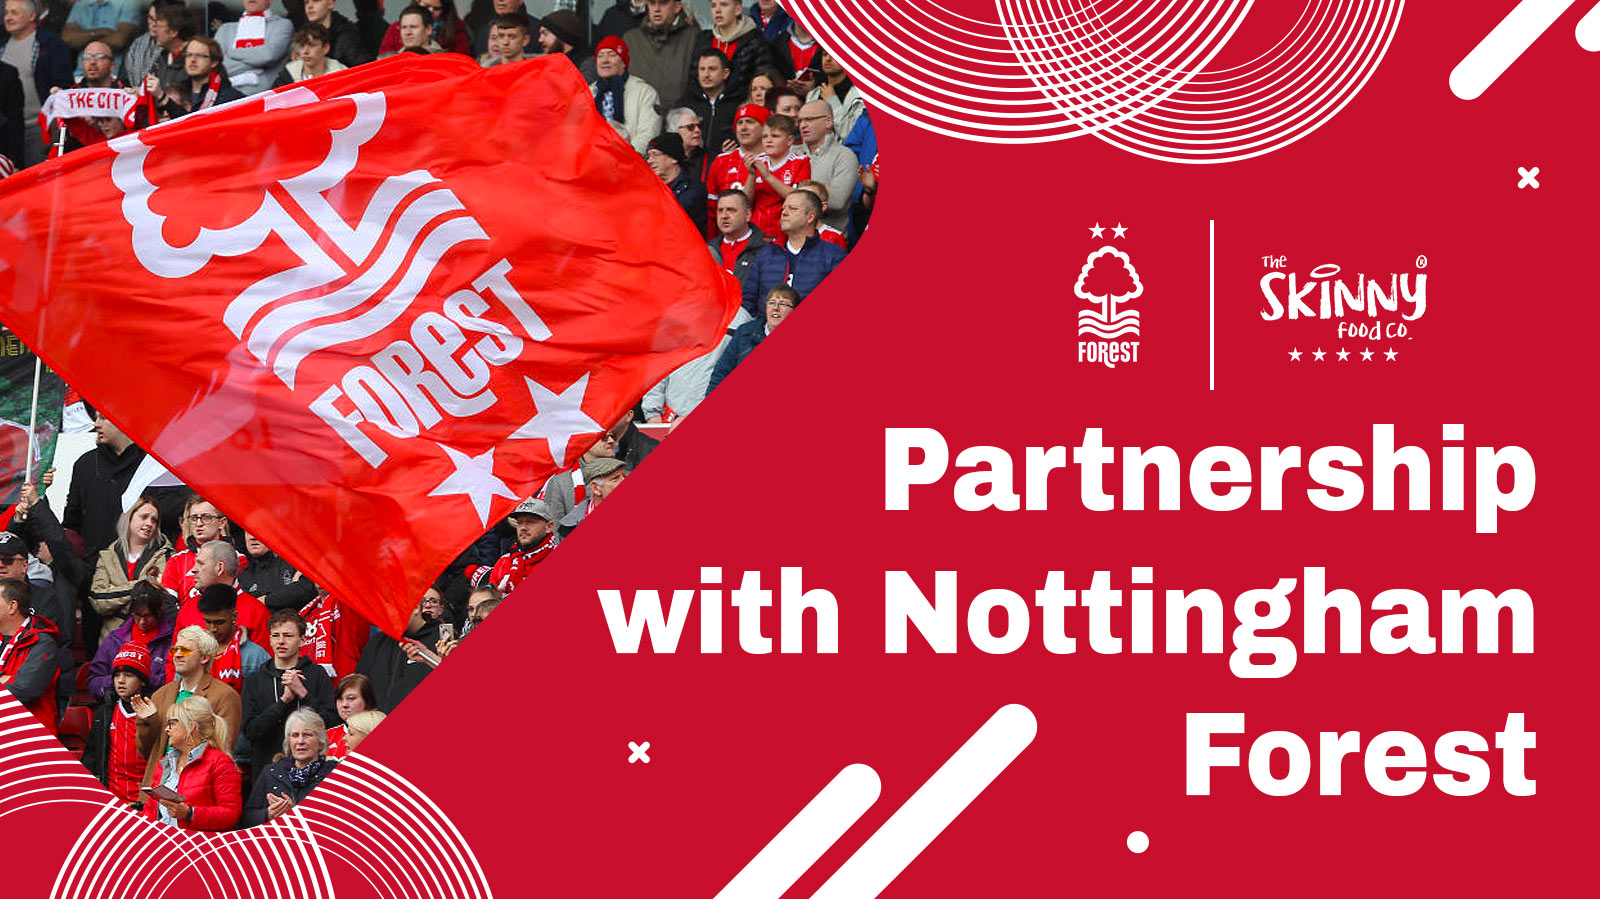 Skinny Food Co. Sponsorship with Nottingham Forest Football Club